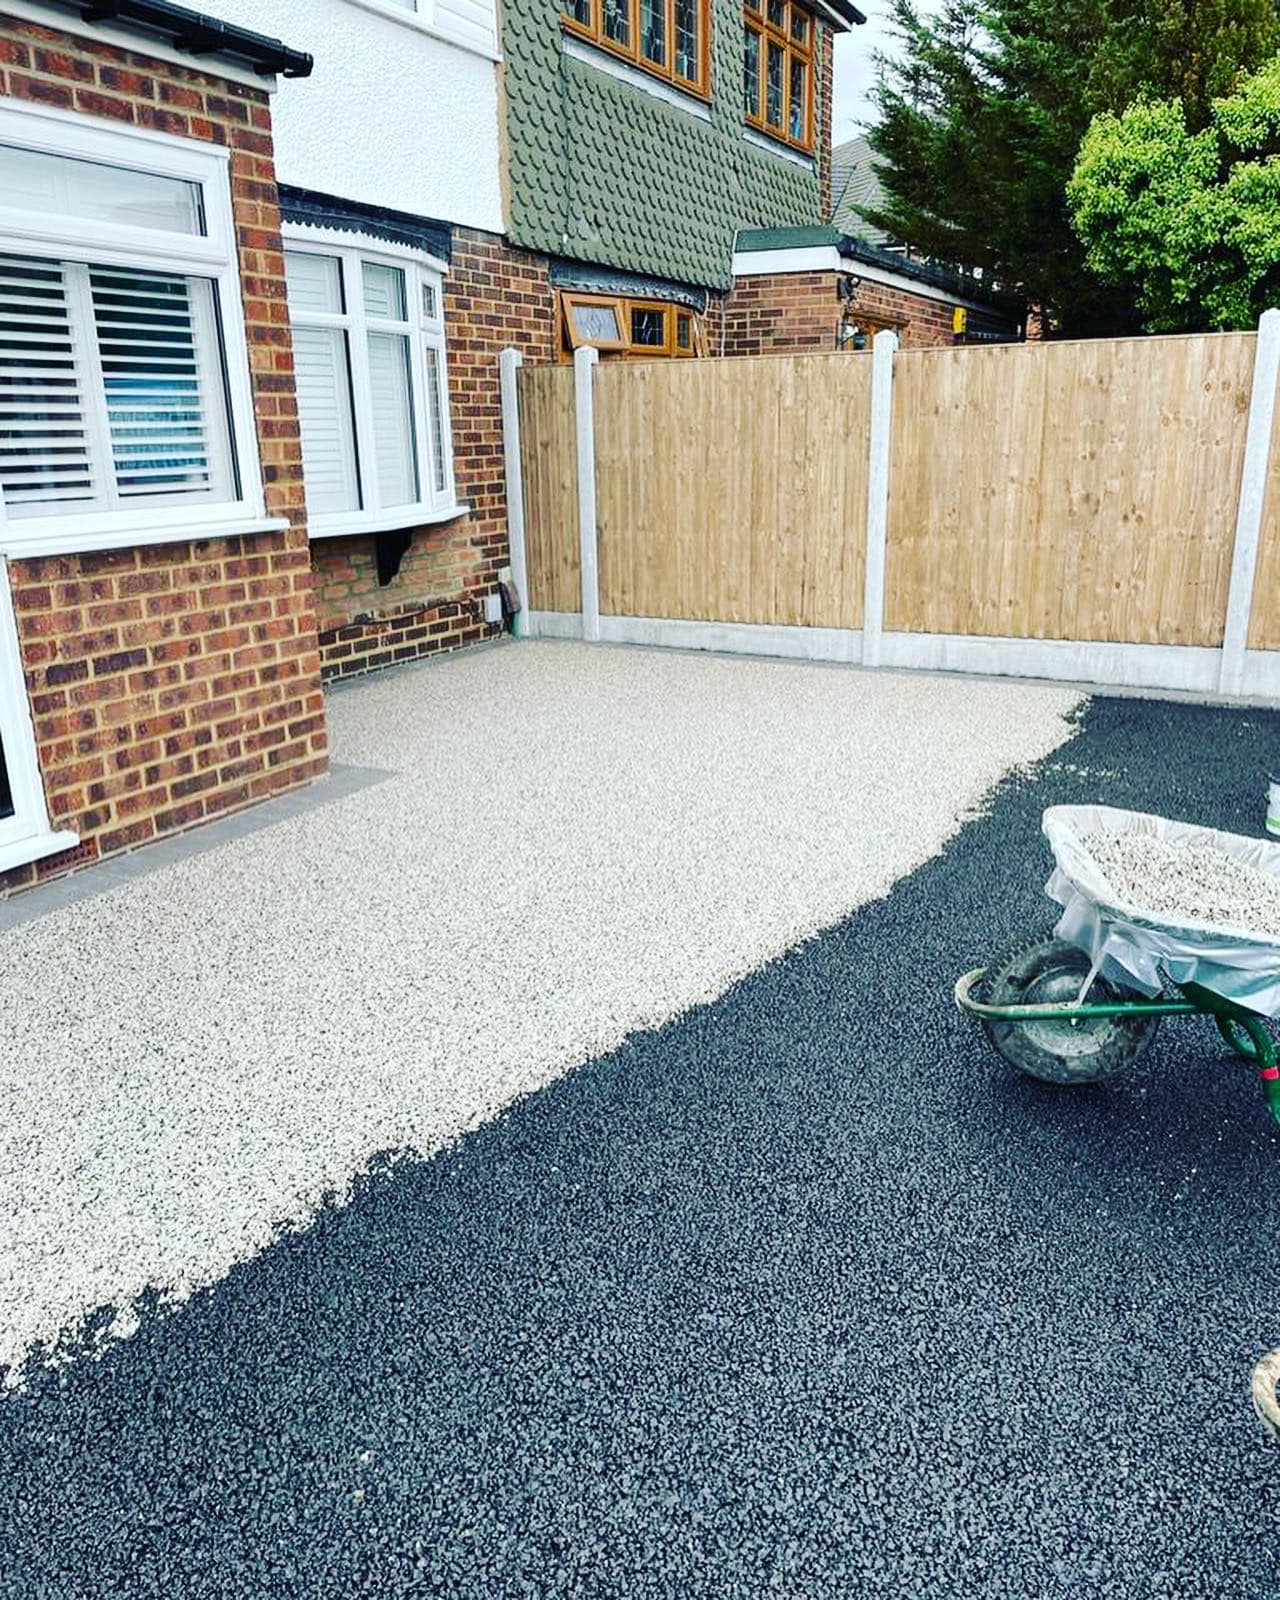 Why Choose Tarmac to Enhance Your Upminster Home Curb Appeal?